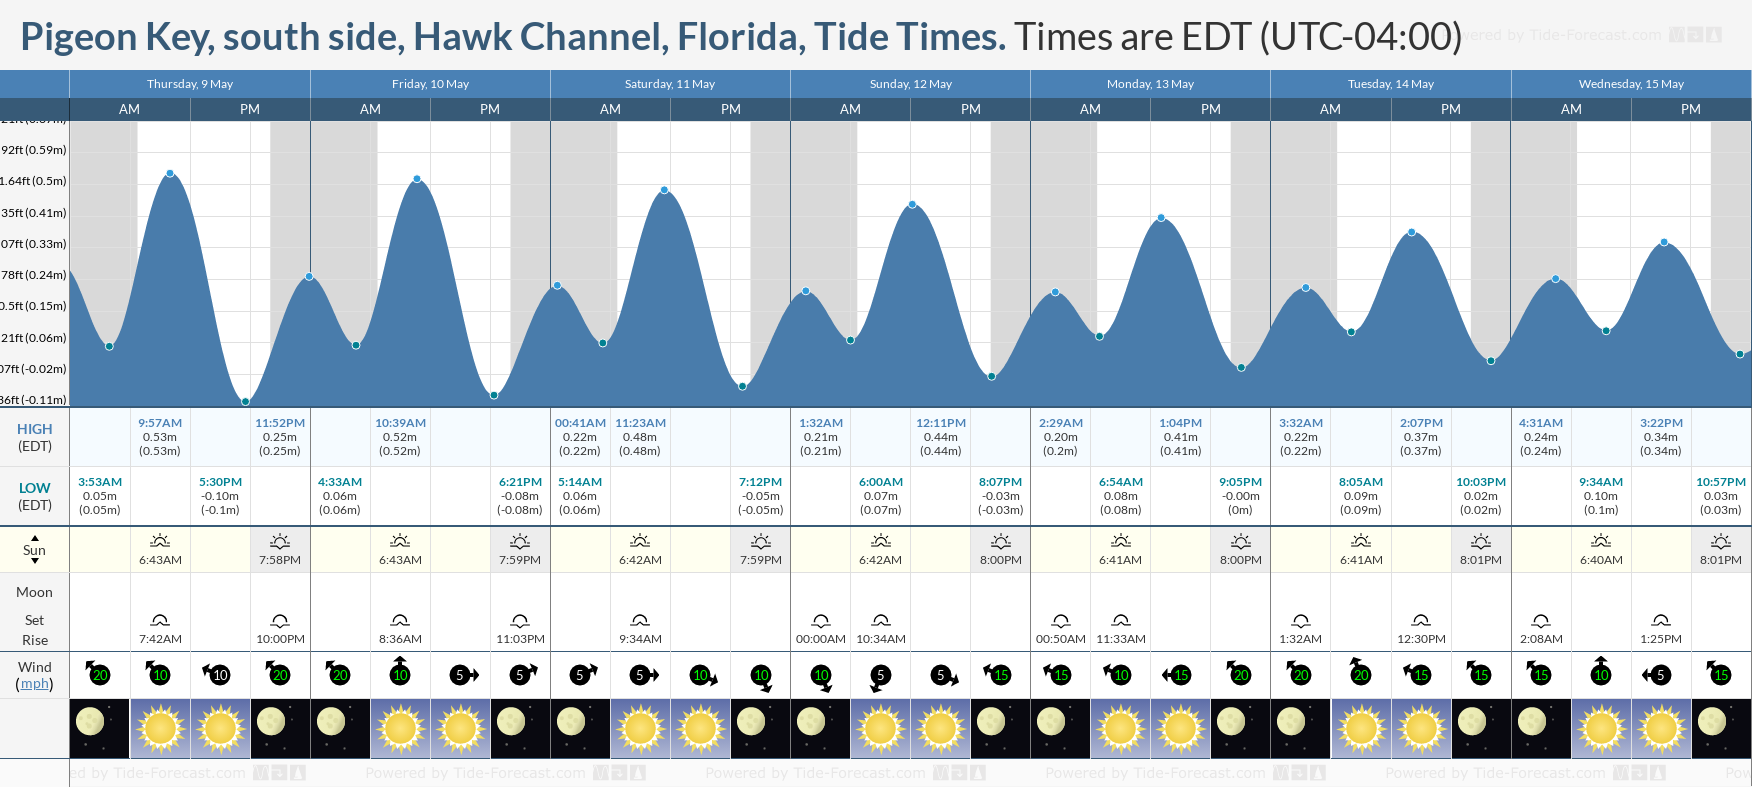 Pigeon Key, south side, Hawk Channel, Florida Tide Chart including high and low tide tide times for the next 7 days